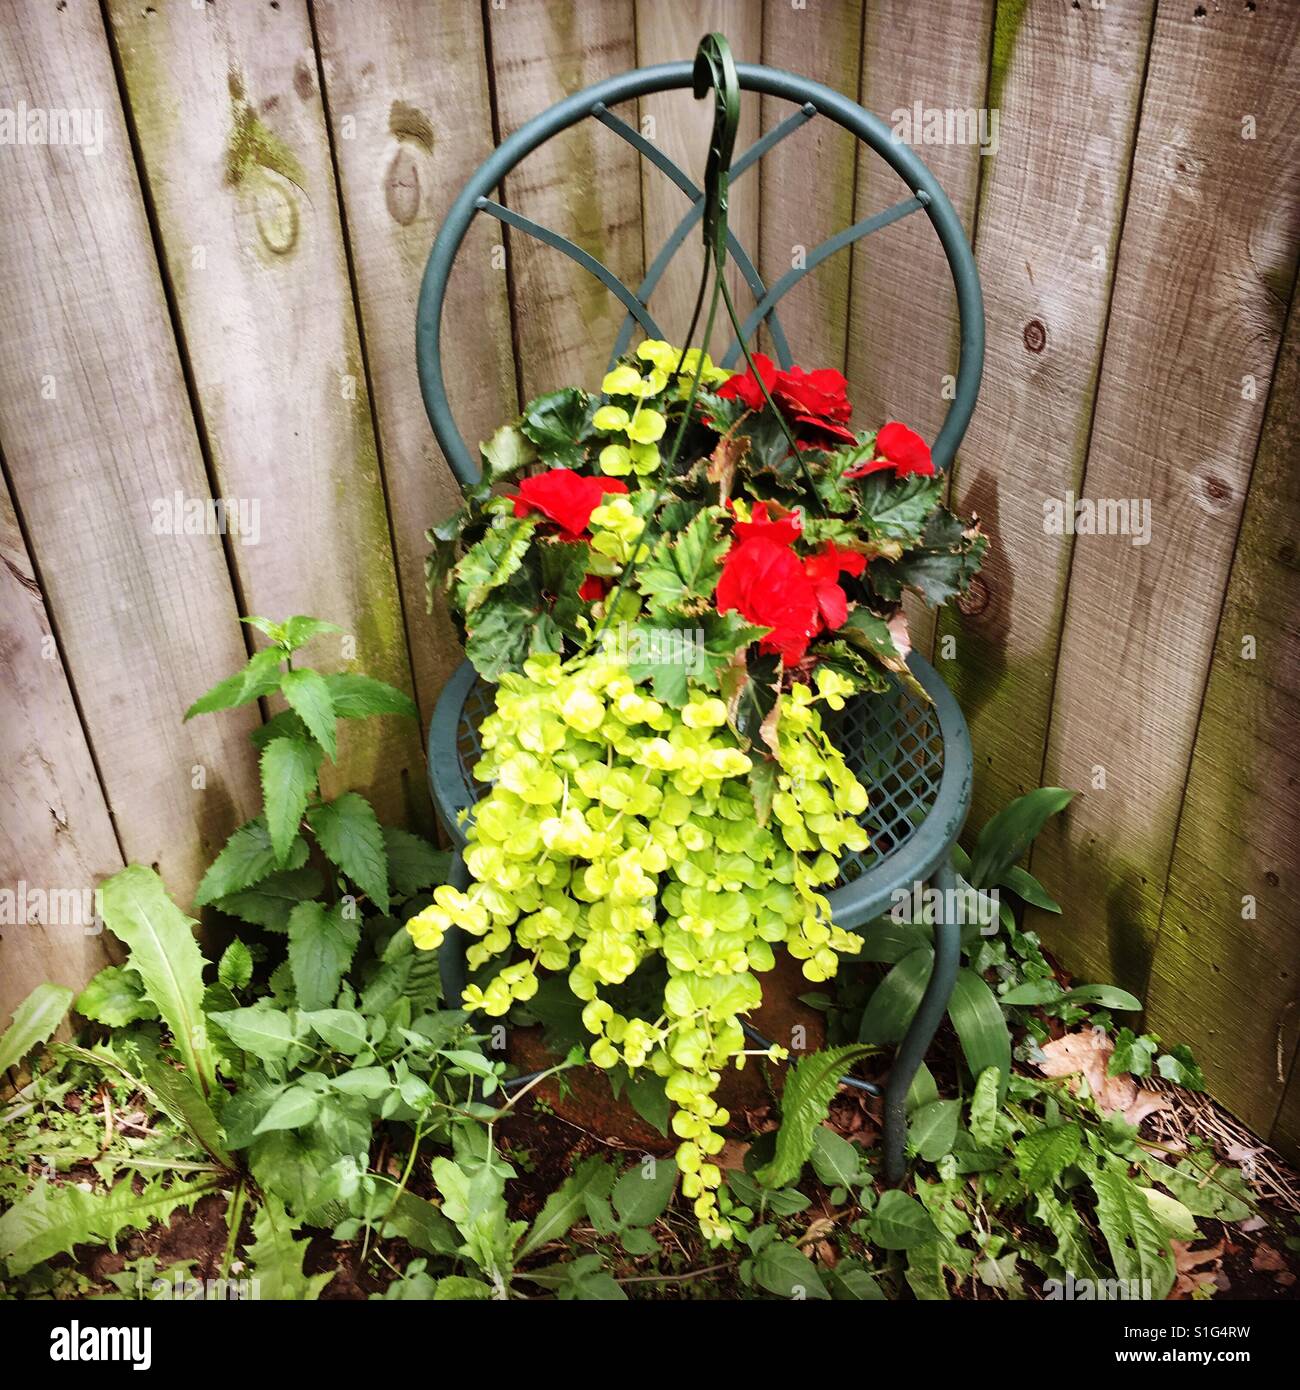 Backyard corner lawn decor using an old chair and a hanging basket. Stock Photo